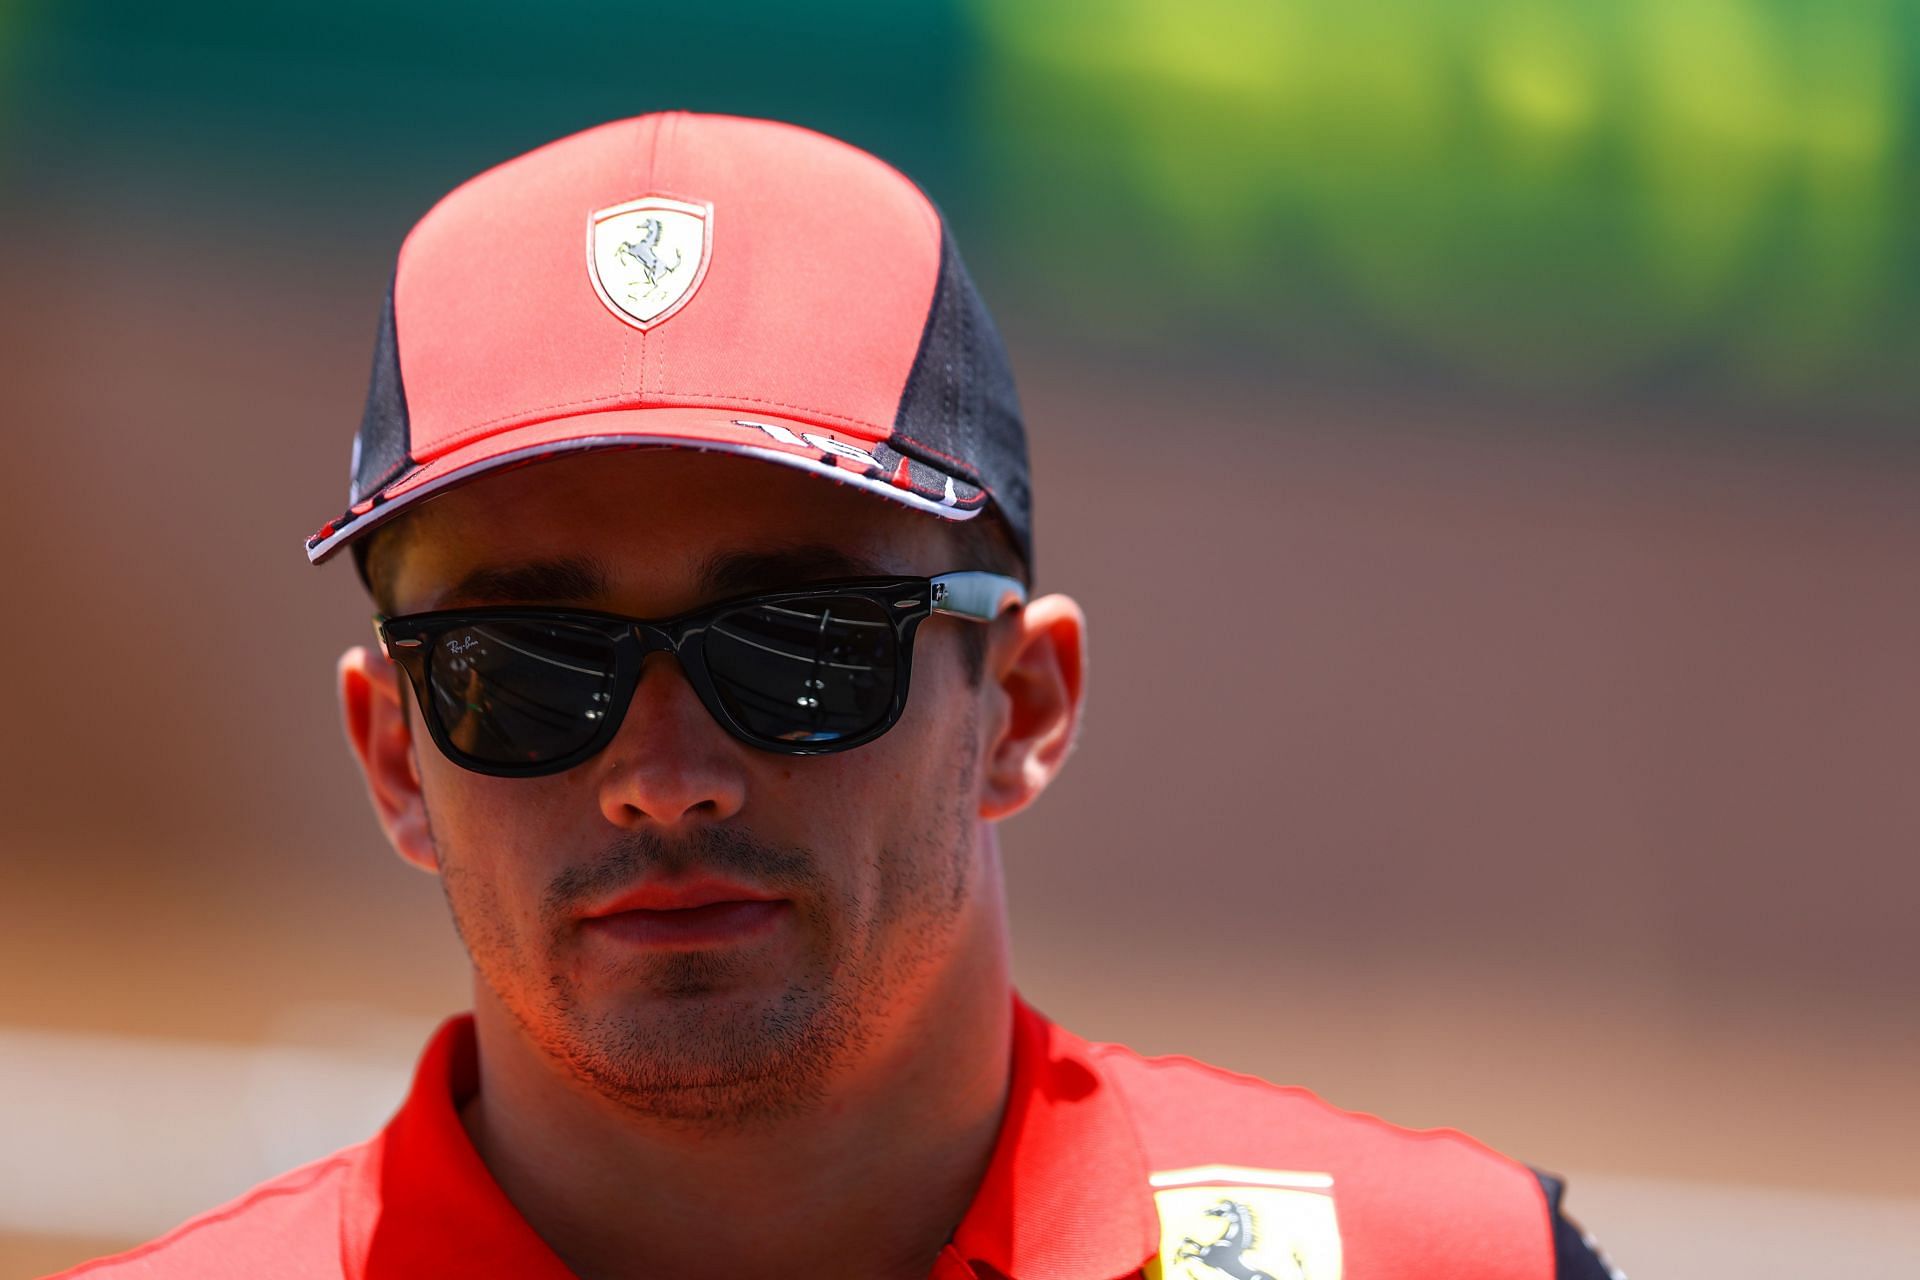 Charles Leclerc lost the championship lead for the first time this season after the Spanish GP